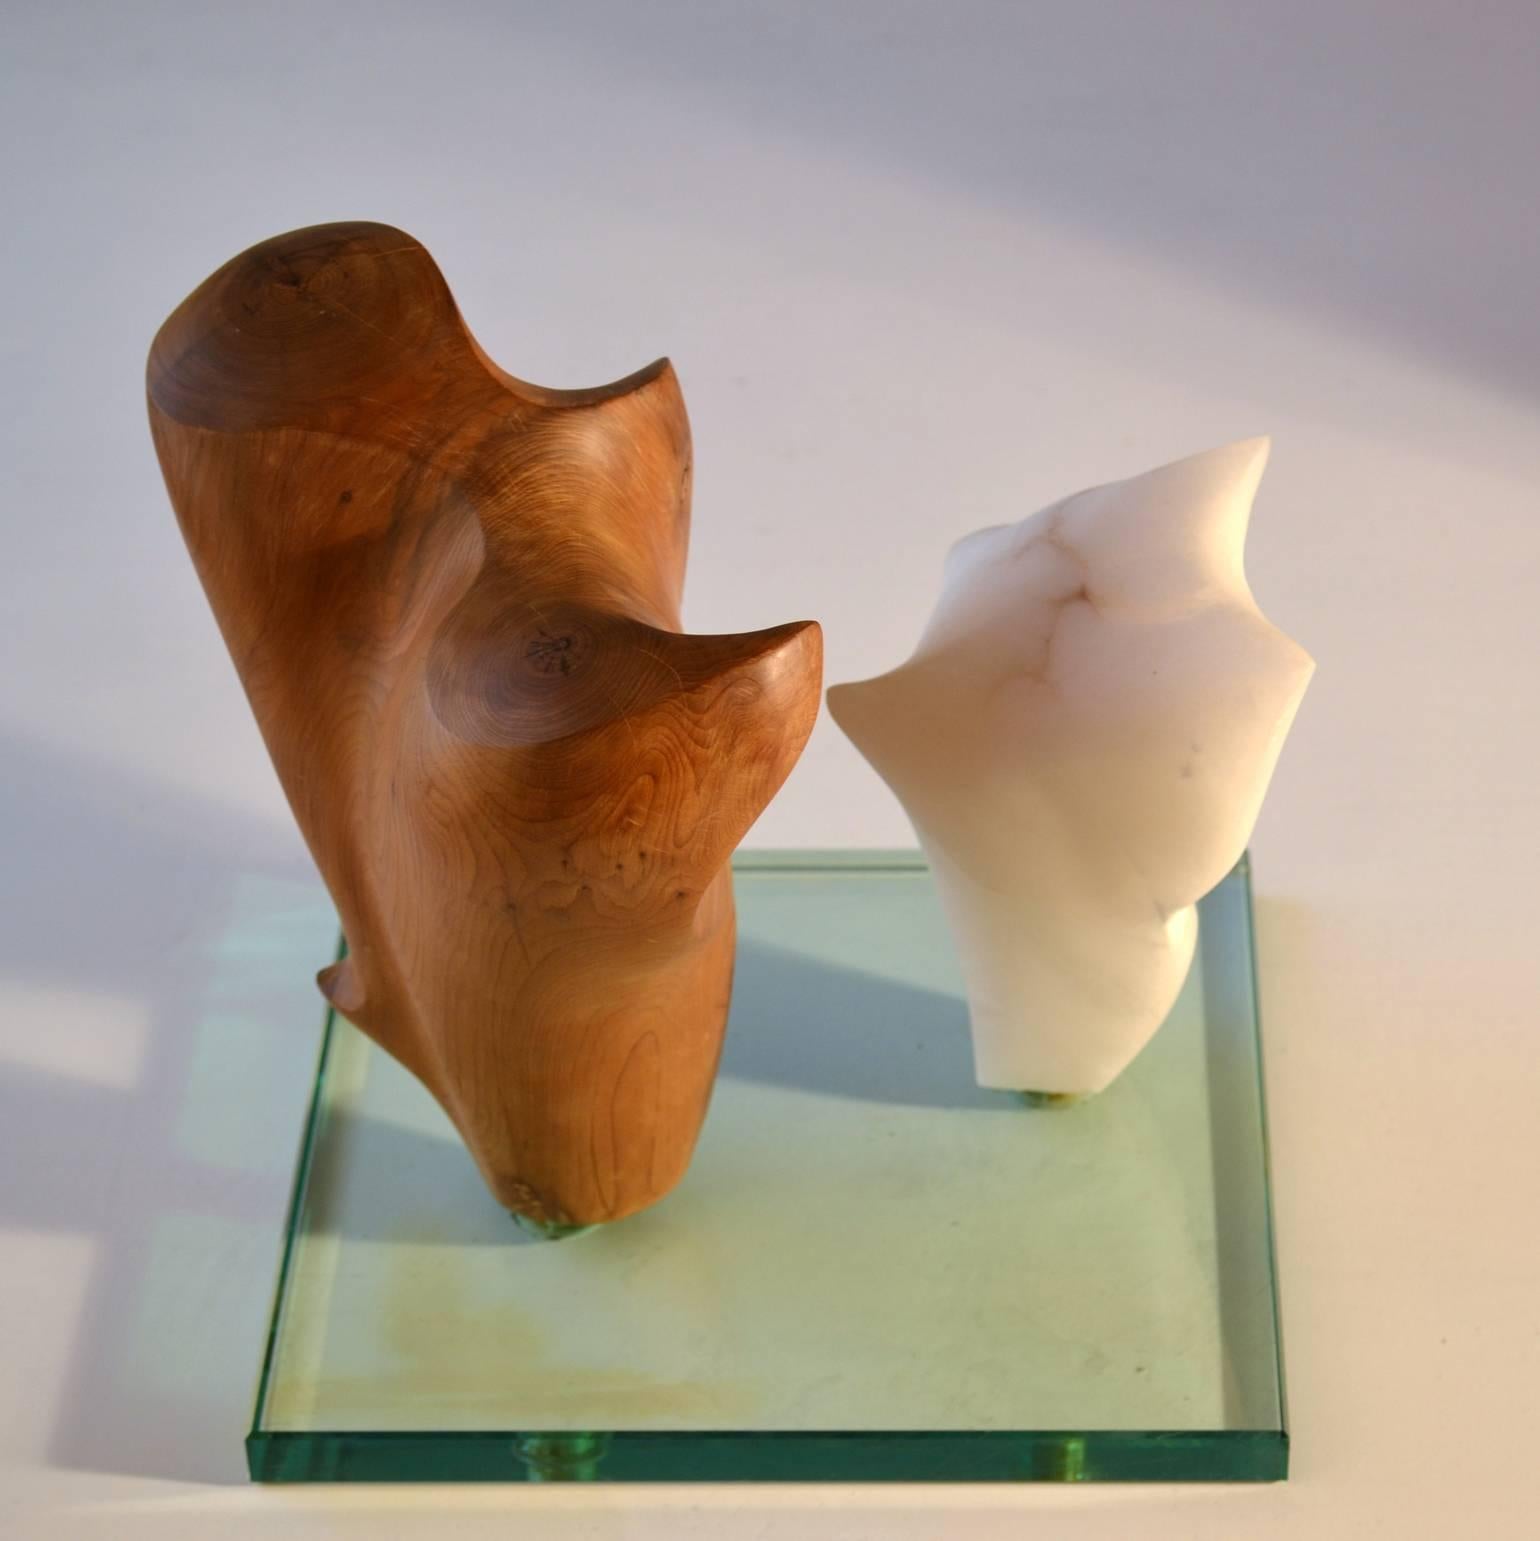 Two organically formed sculptures assembled on a glass plinth are in a dialogue with each other. One sculpture is carved in alabaster with a quiet sheen. The other is curvaceously chiseled and polished in wood. Sculpted by an unknown artist in the